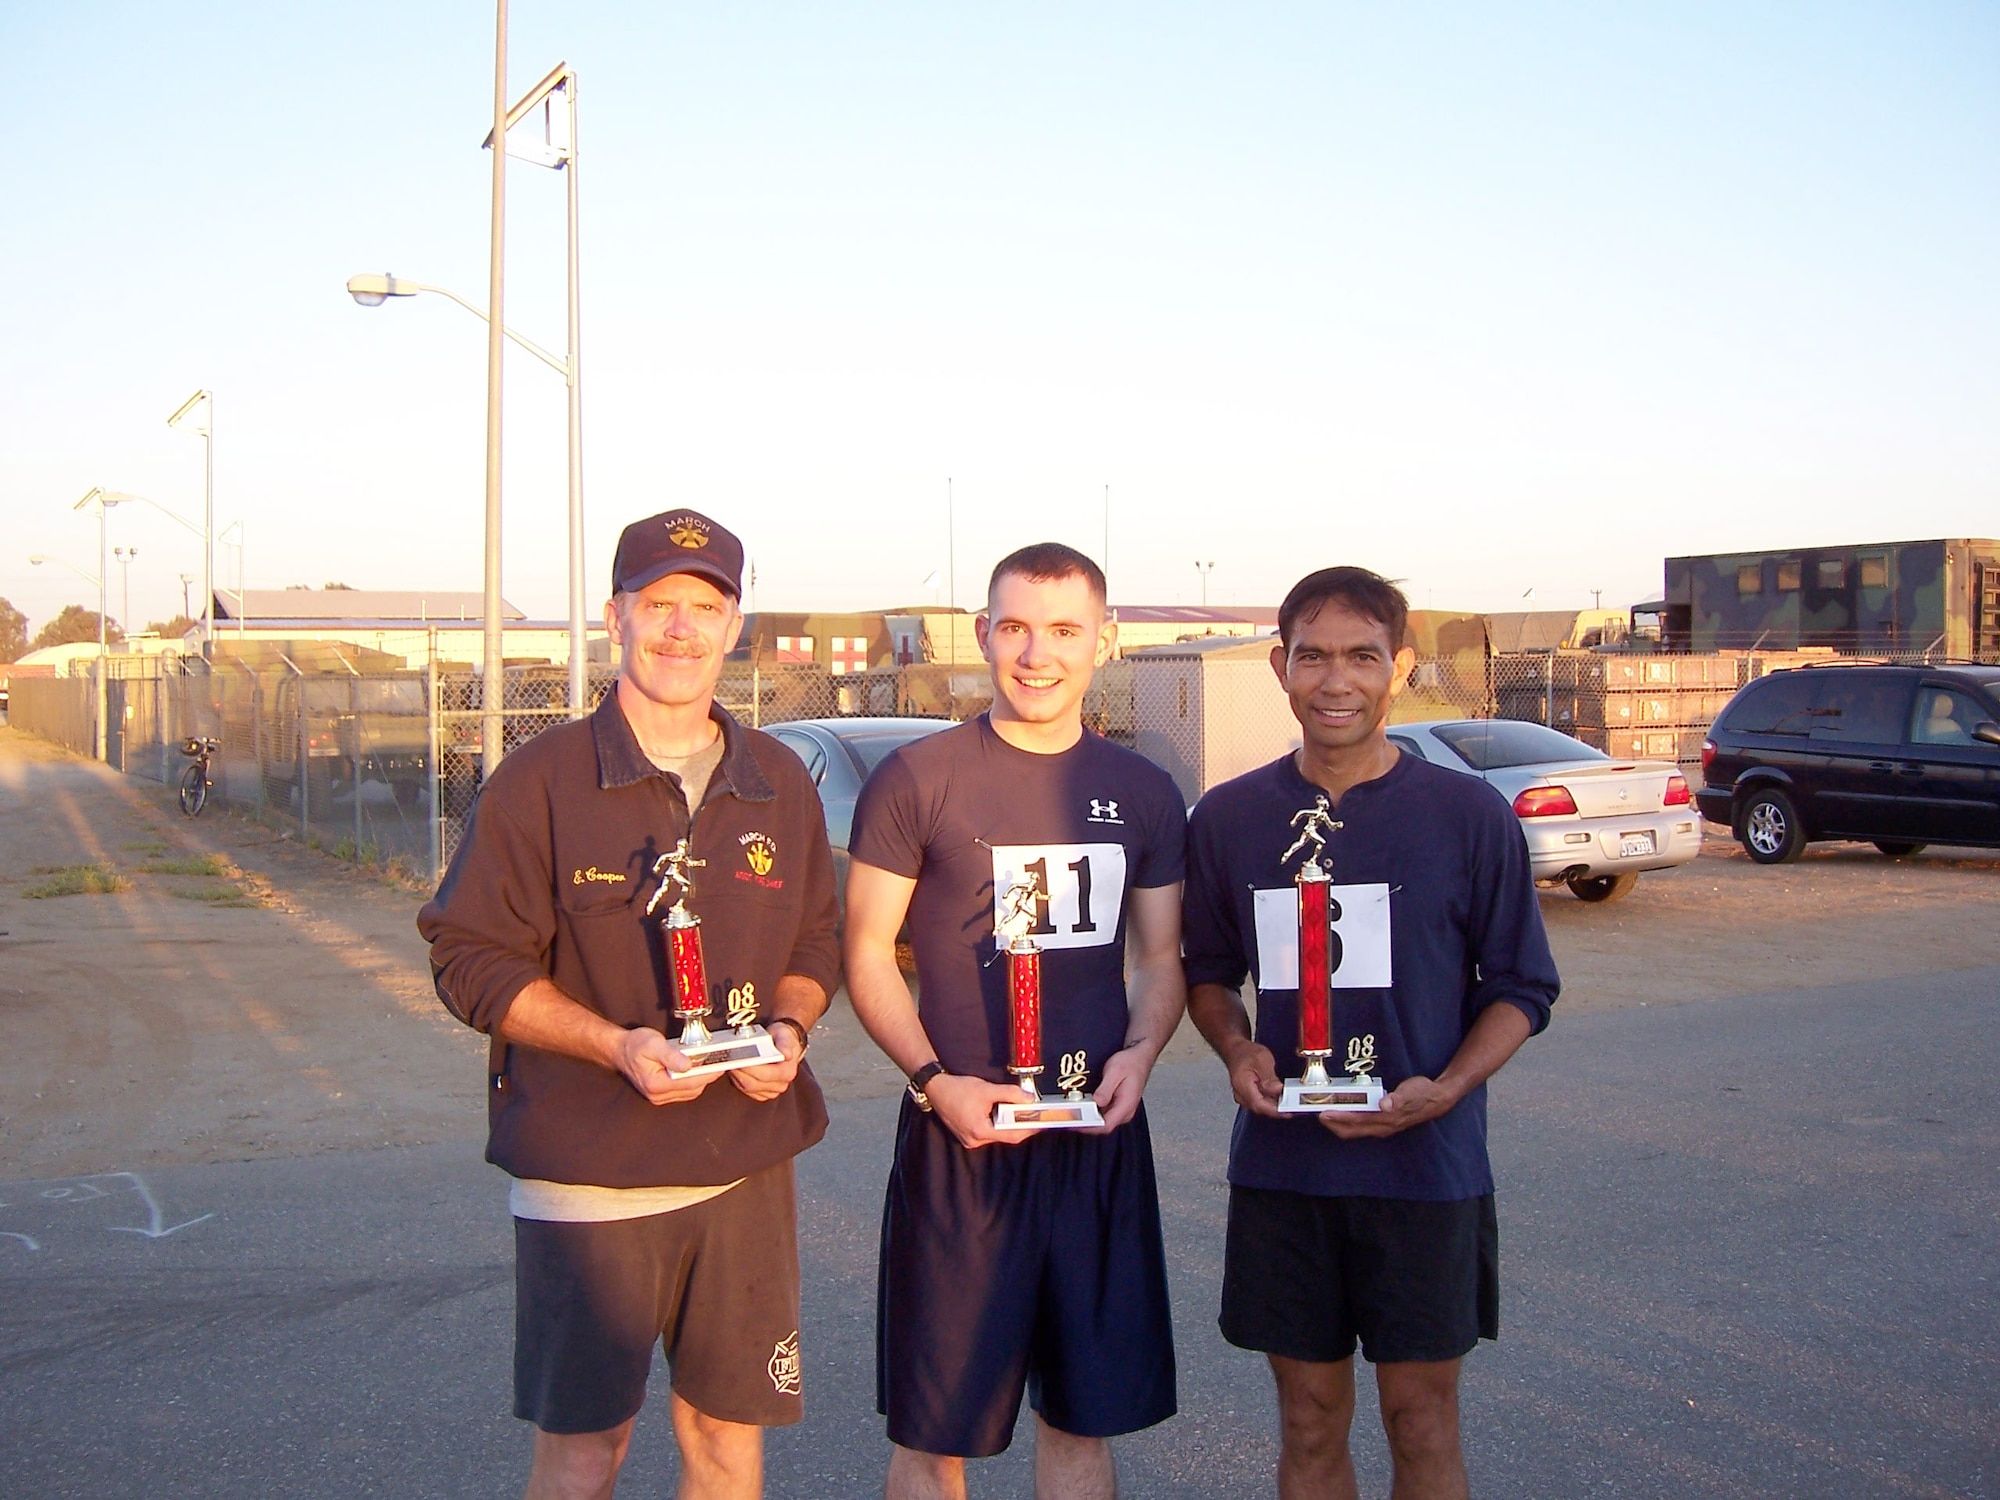 Winners of the Men’s category of the Fall-In 5K Run/Walk are: (left to right) Mike Cooper, Fire Dept., 3rd place; Jed Martin, ANG, 2nd place; and Roque Batayola, 452 AMXS, 1st place. (U.S. Air Force photo)